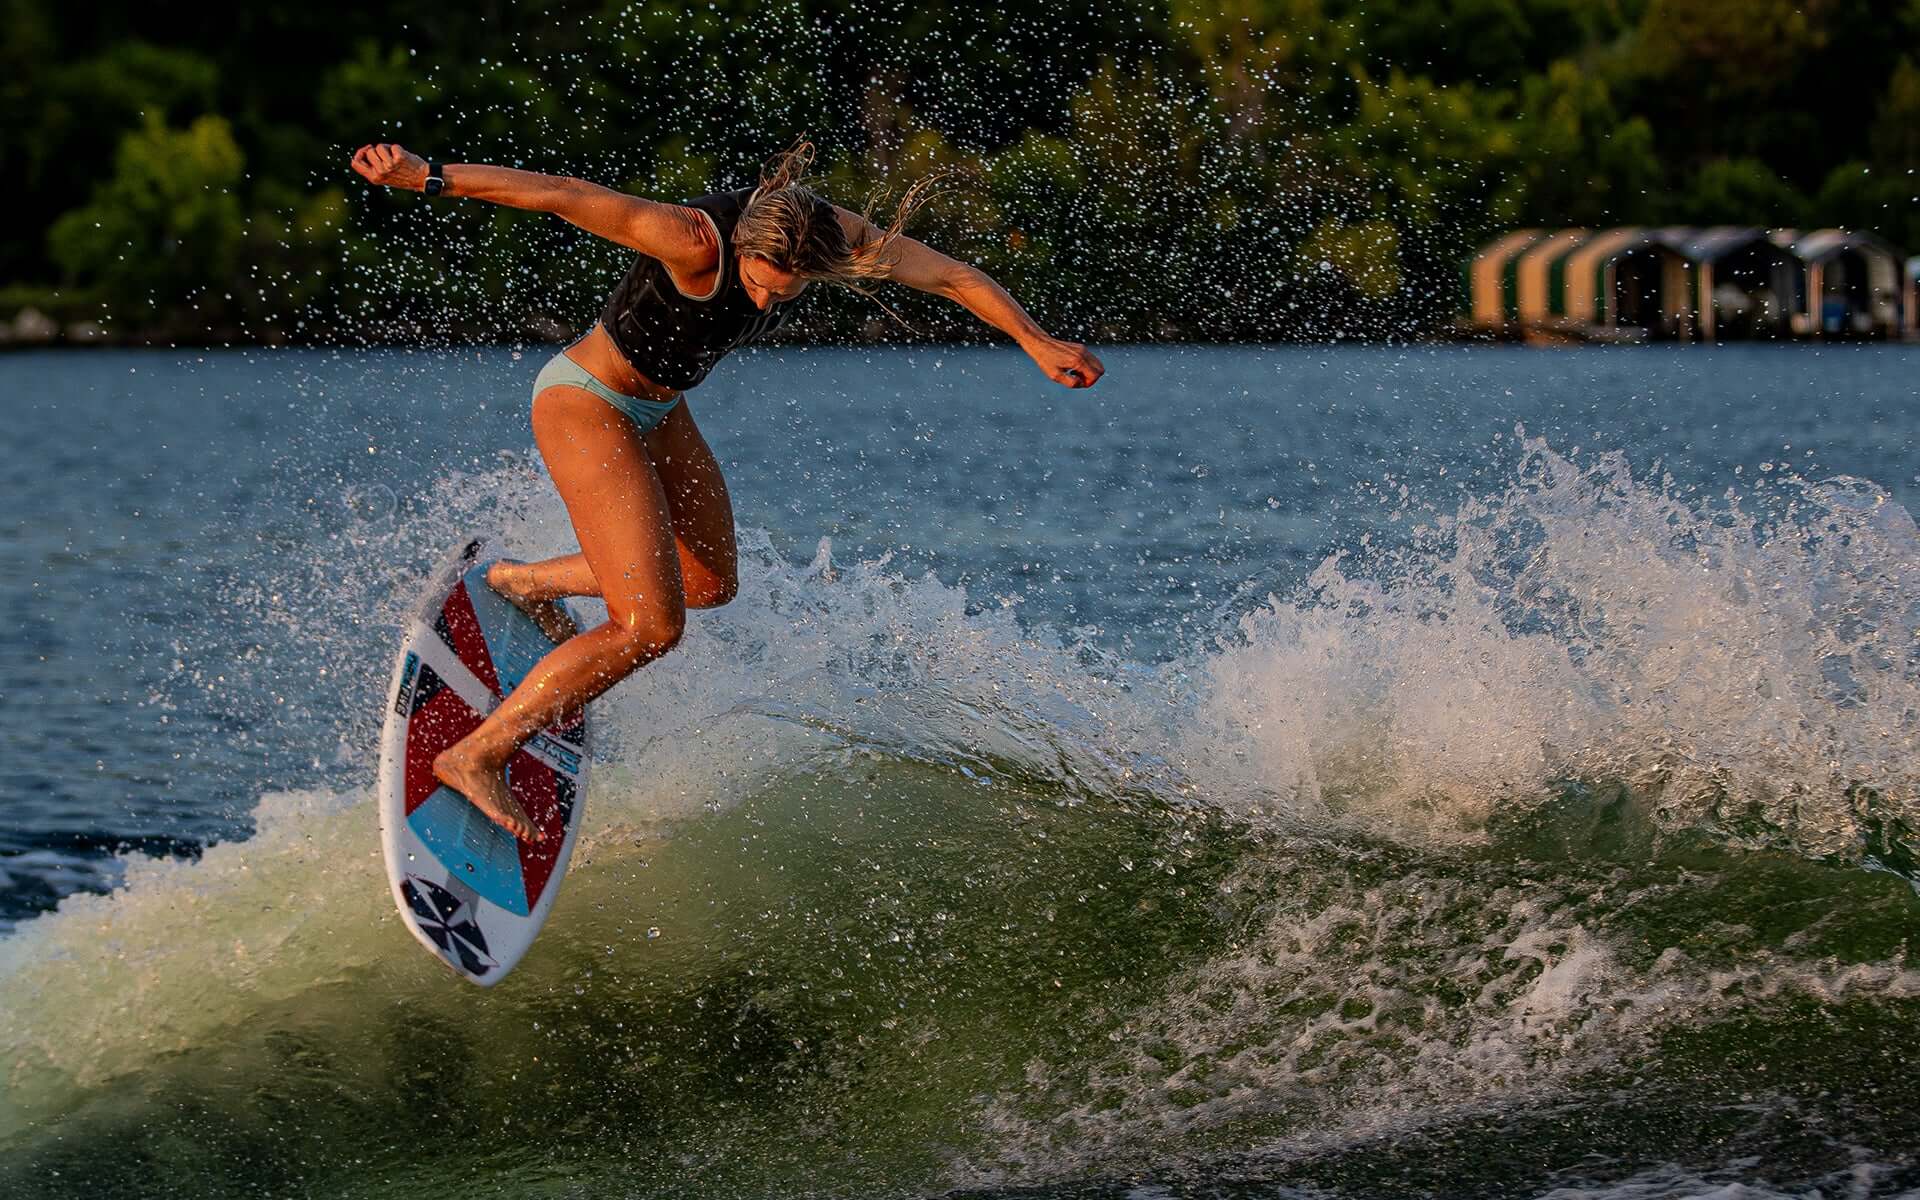 Stacia Bank, a high-performance surfer, is riding a wave on a Phase 5 2024 Swell Wakesurf Board.